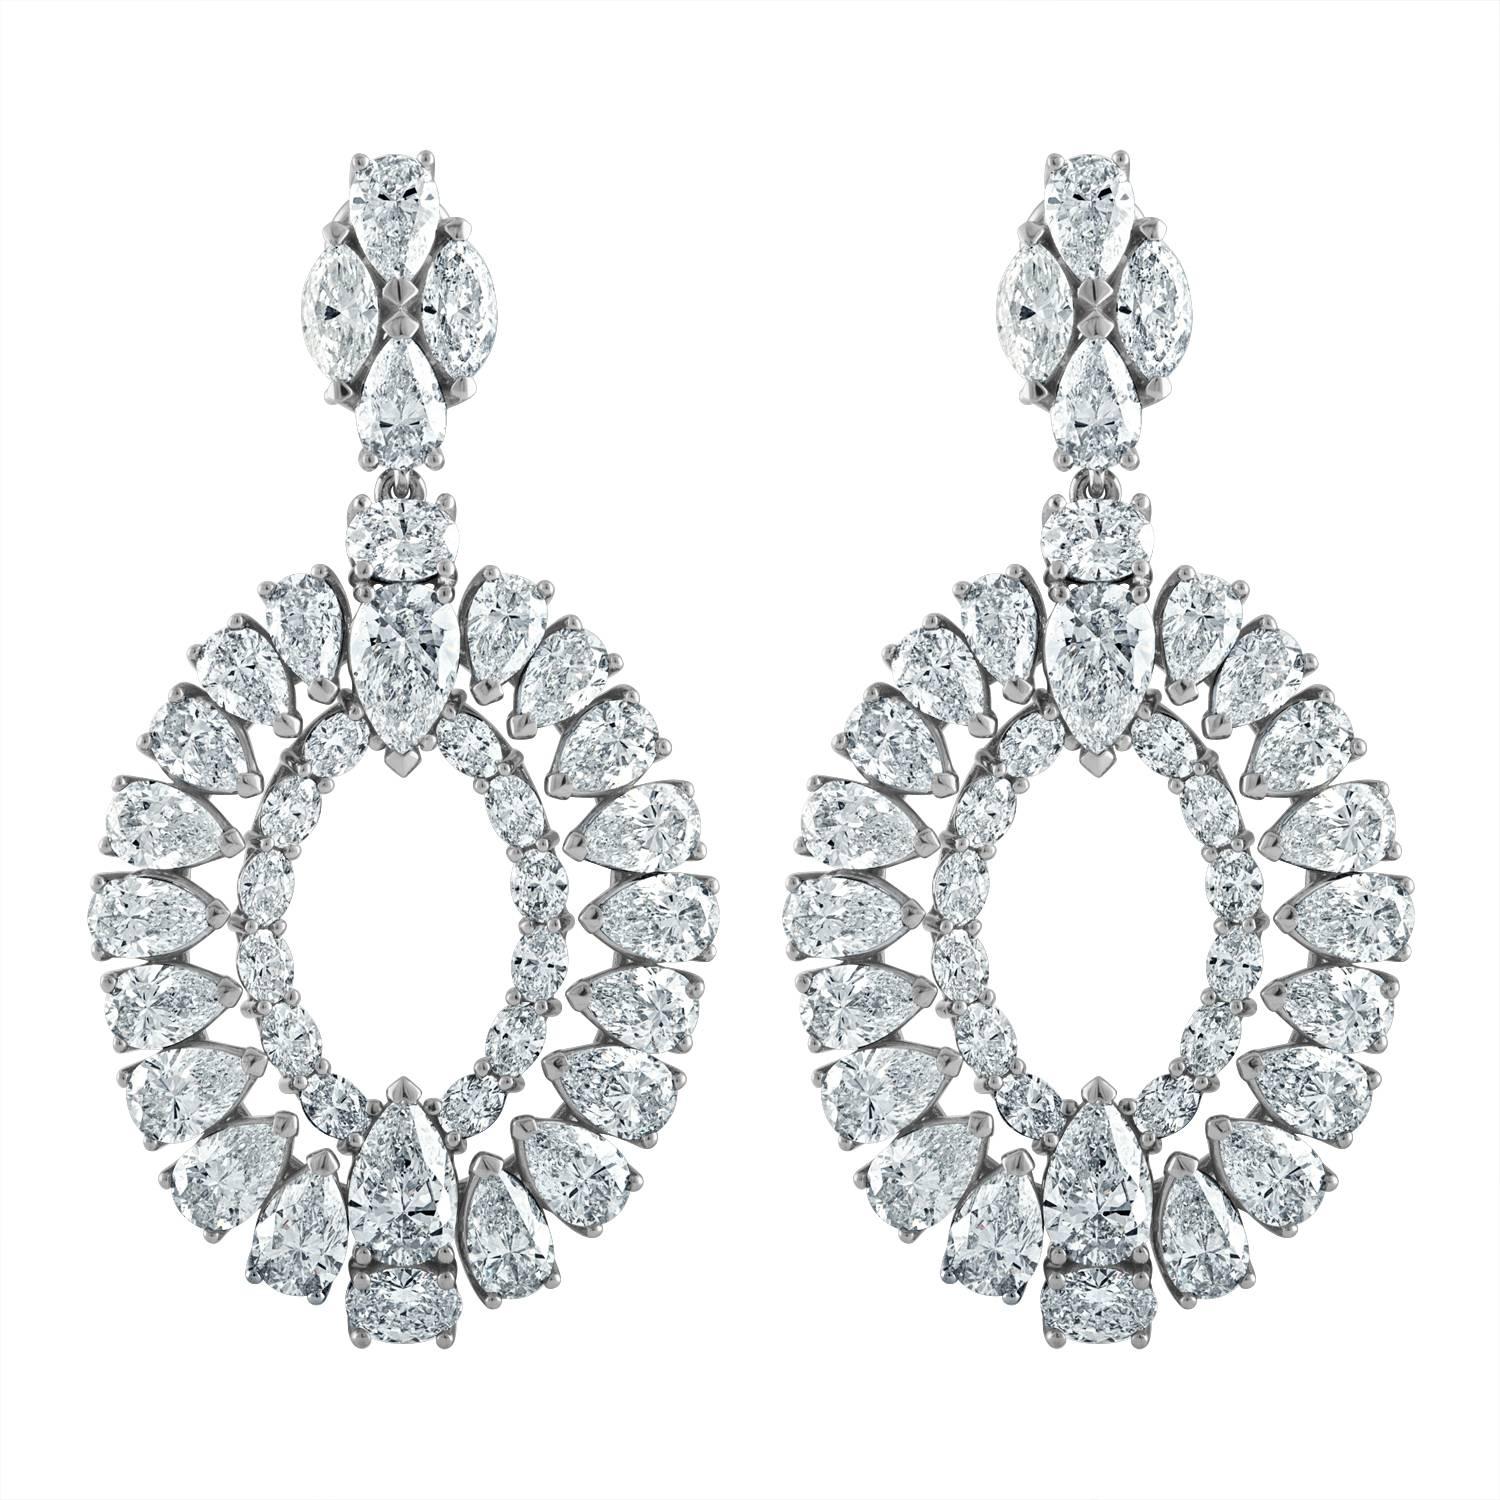 Platinum Earrings with 31.27 Carat of Fancy Shapes Diamonds